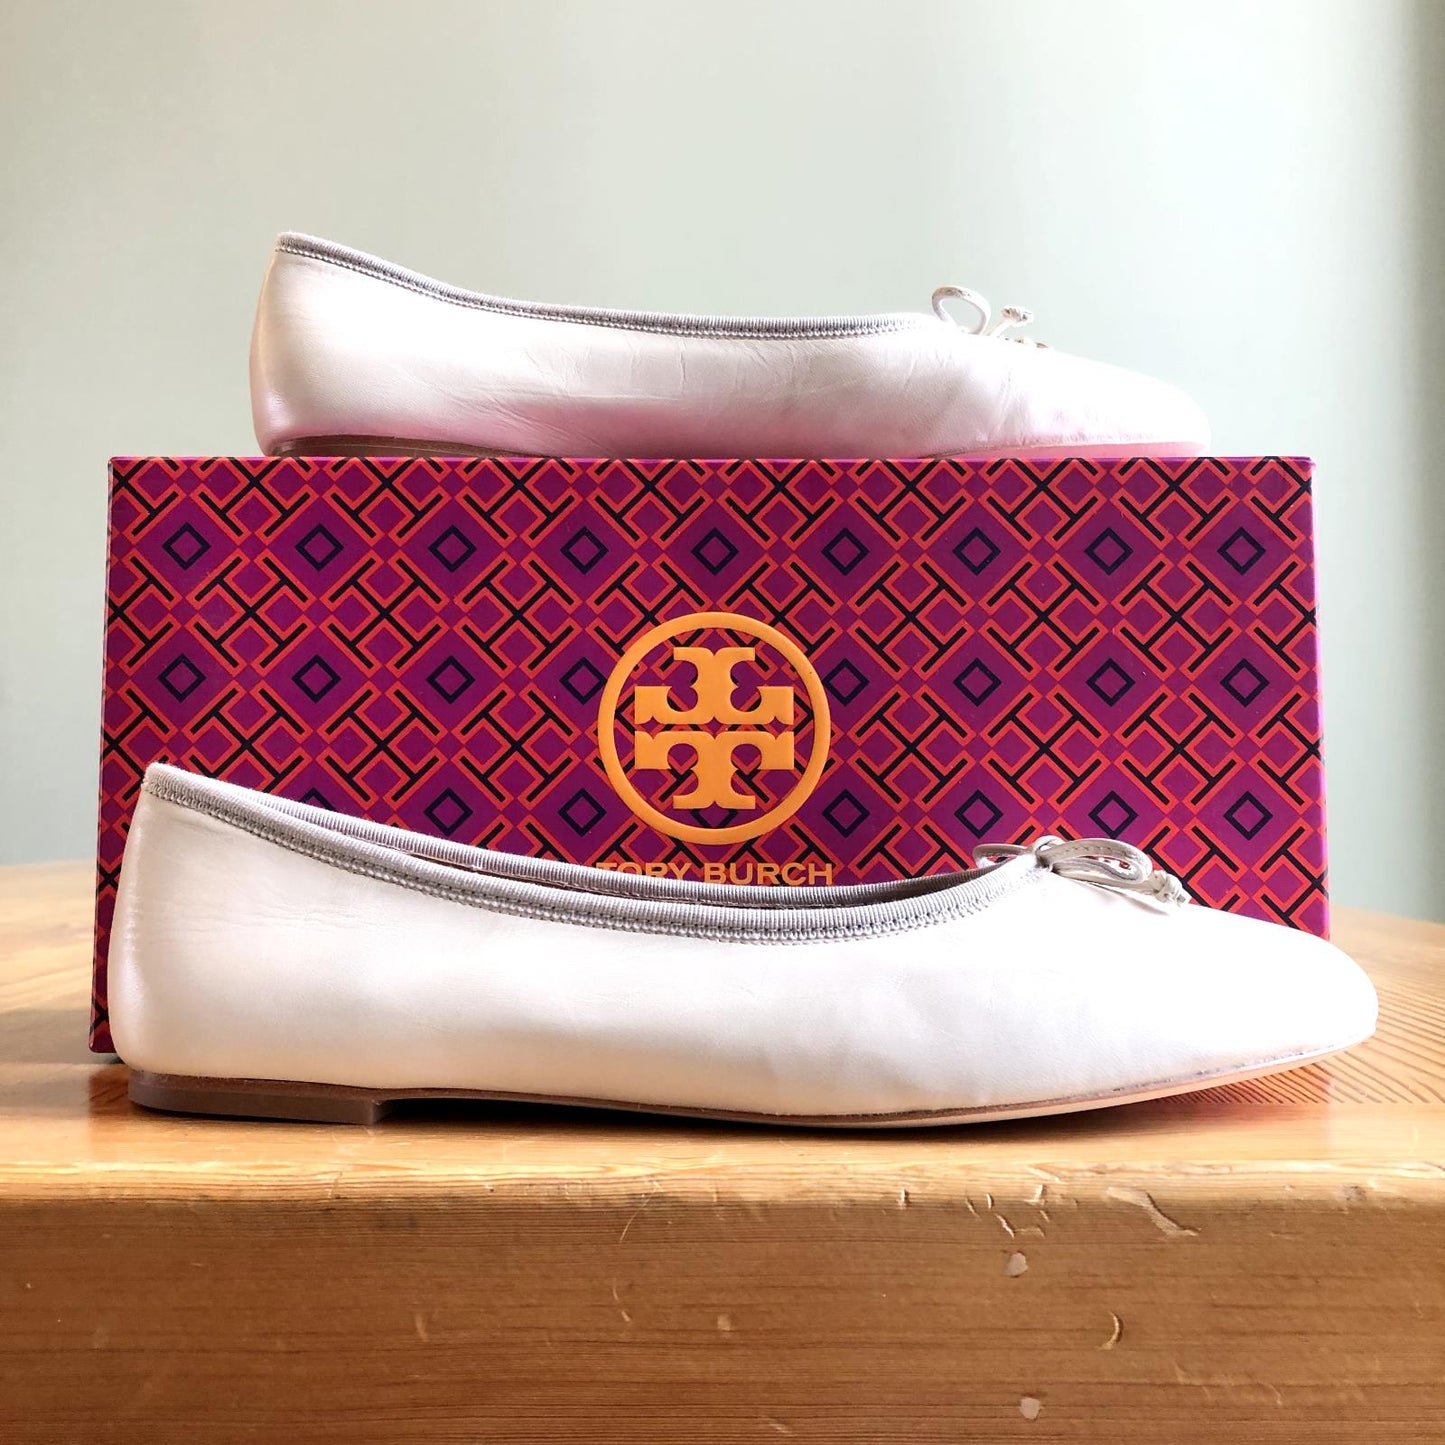 10 - Tory Burch $268 Rice Paper Ivory Charm Ballet Flats Shoes NEW w/ Box 0221PG